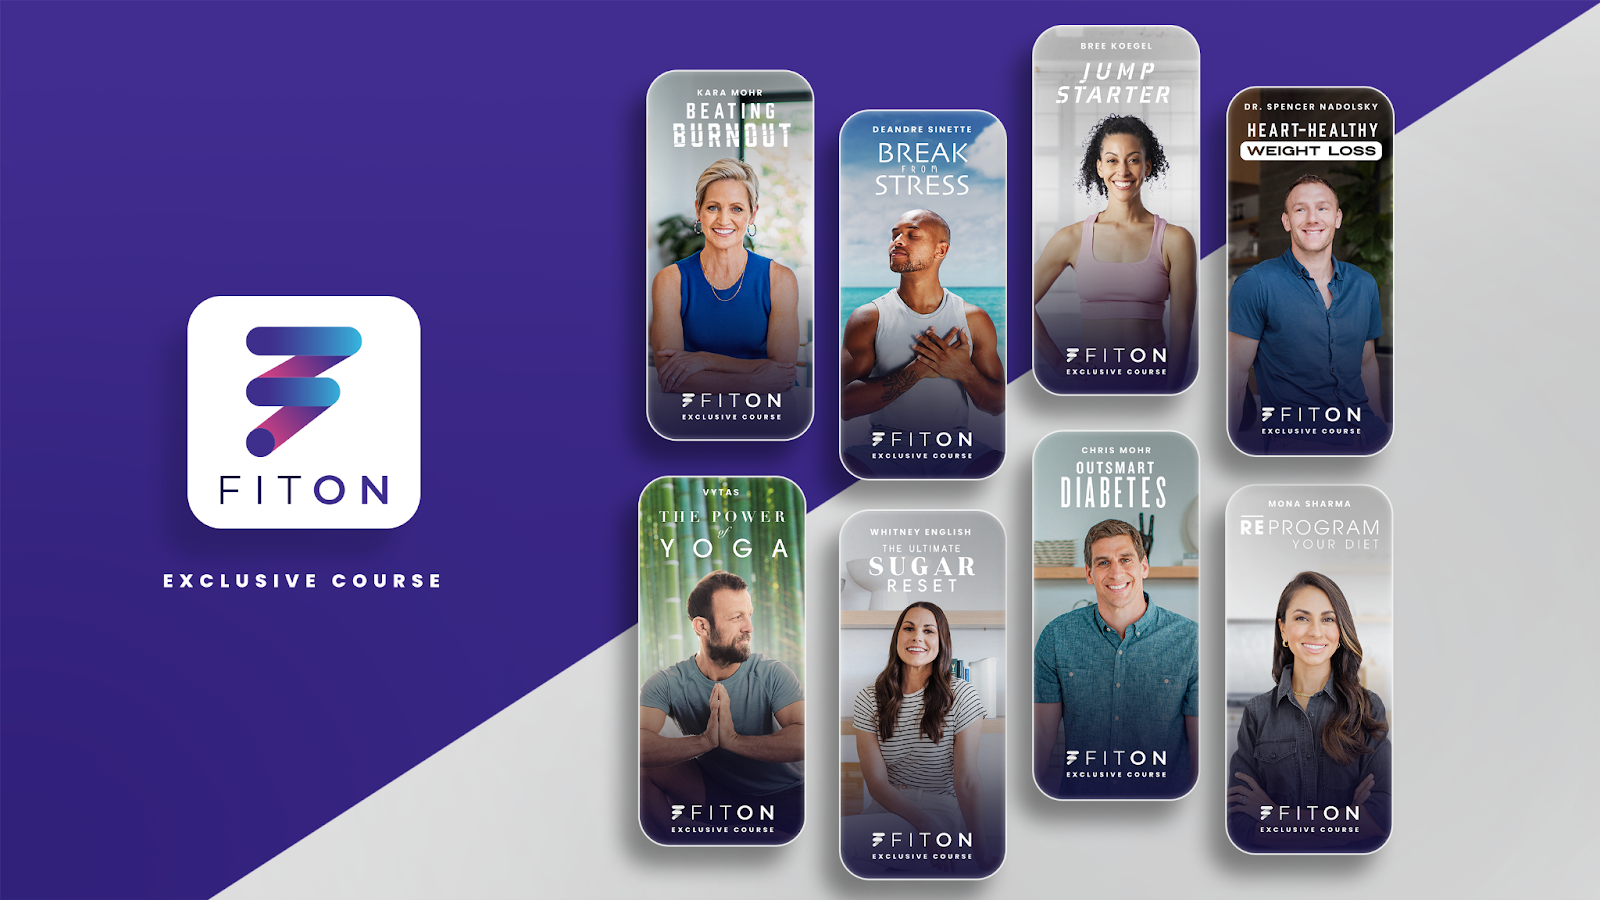 Digital Fitness Platform - FitOn - Announces the Launch of FitOn Health and  New Programs Focused On Seniors and People Managing Chronic Conditions |  Club Industry